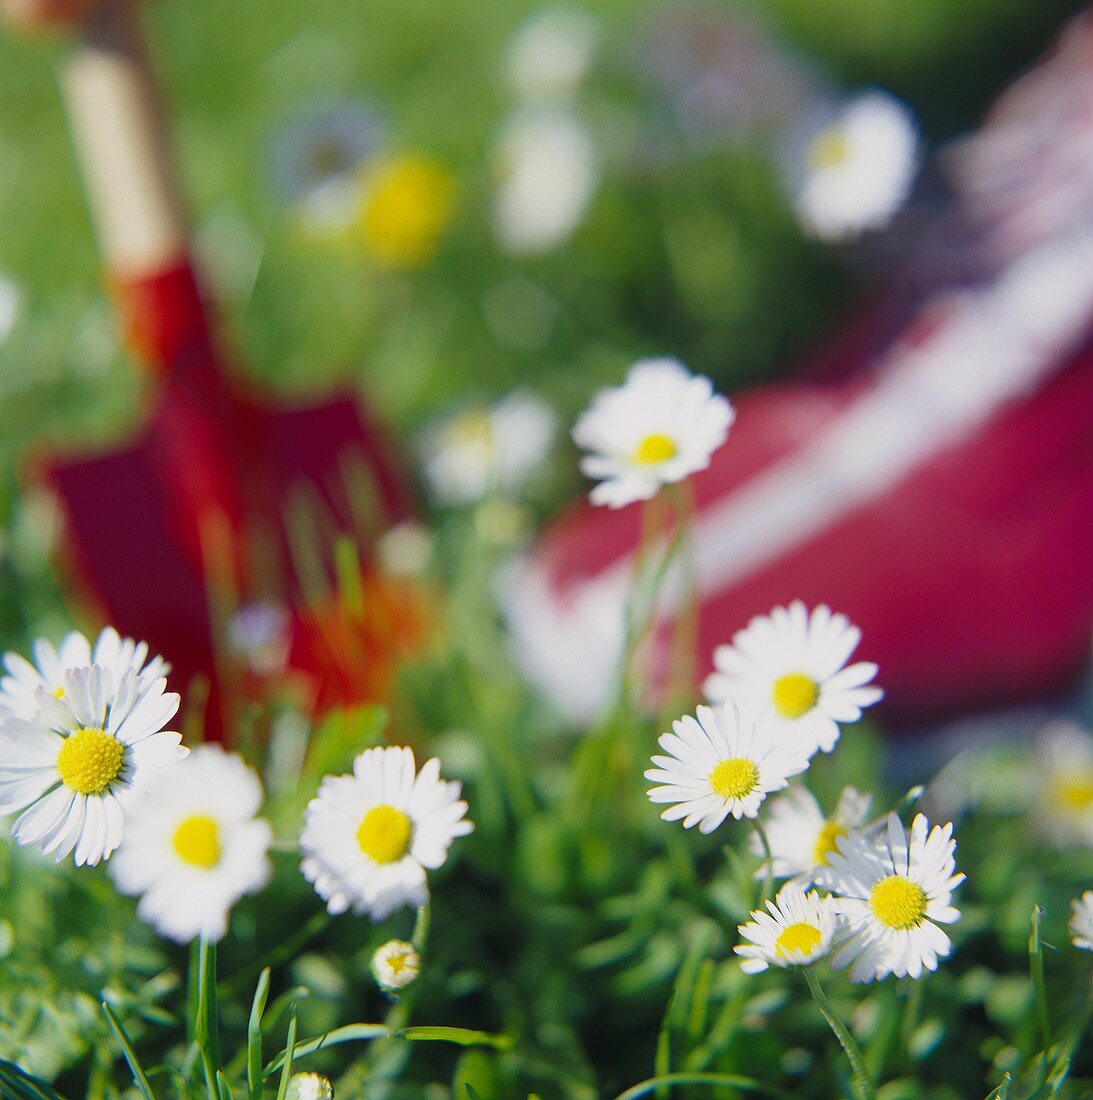 Daisies in meadow with trowel in background